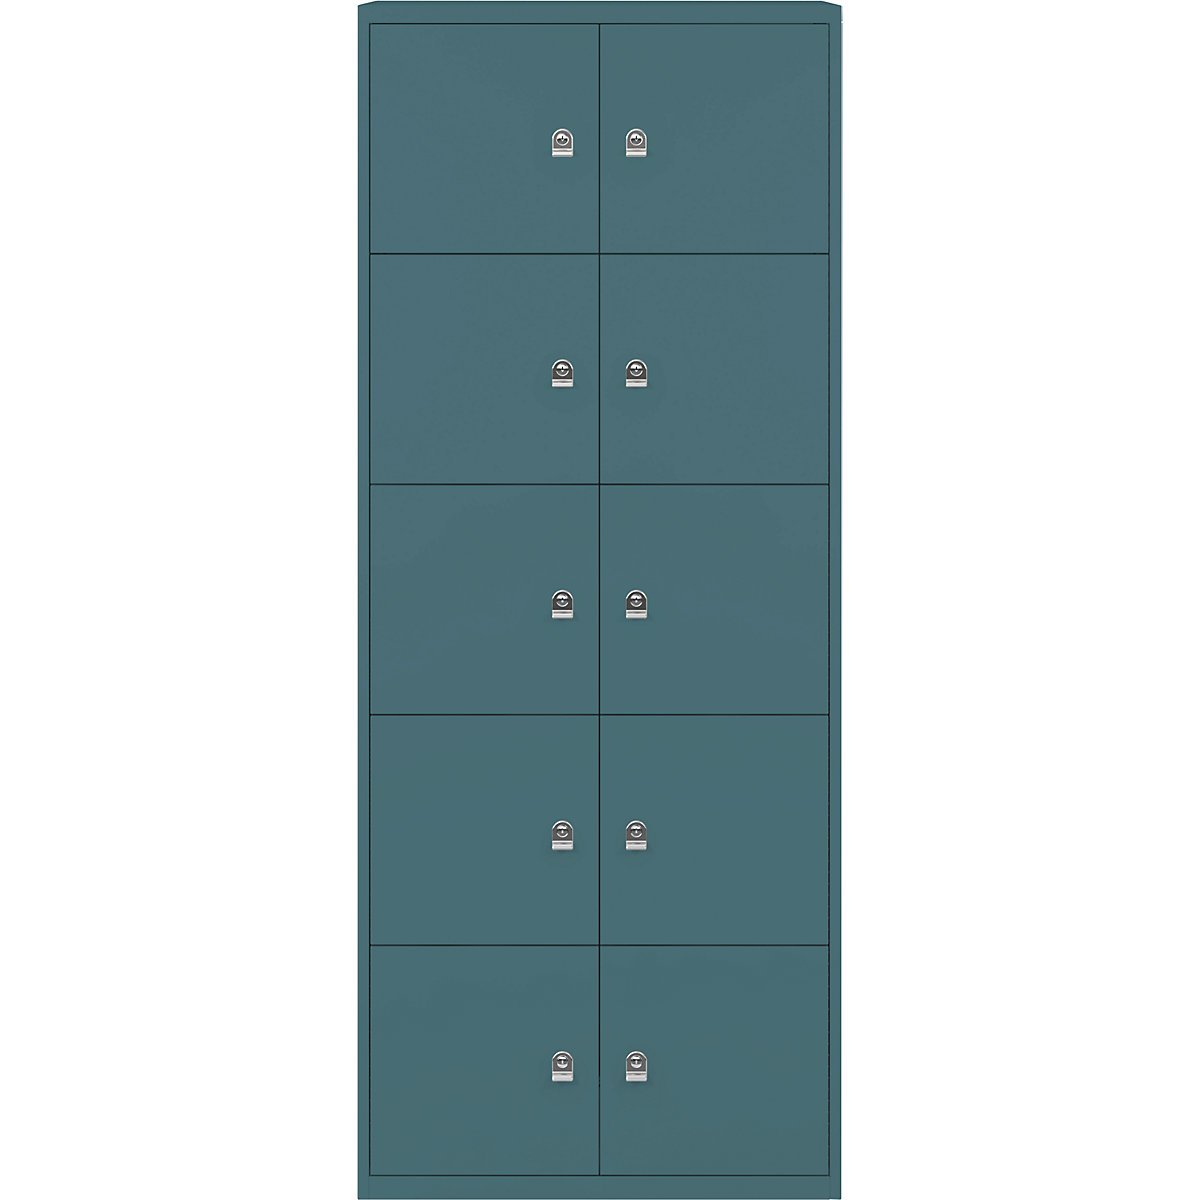 LateralFile™ lodge – BISLEY, with 10 lockable compartments, height 375 mm each, doulton